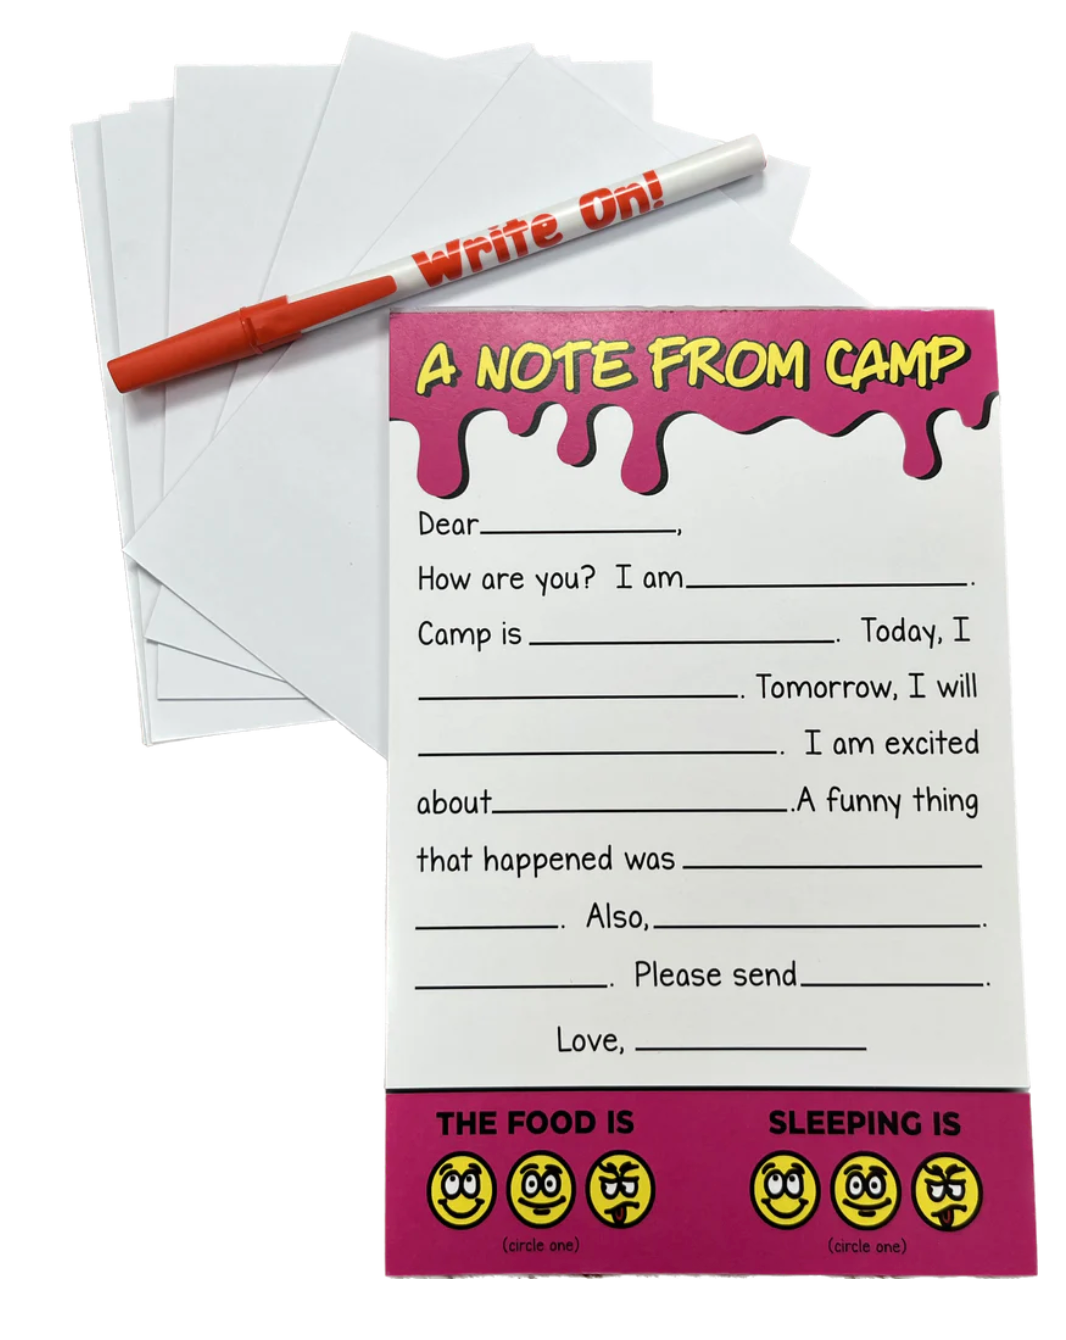 Camp News Fill-In Stationery Set